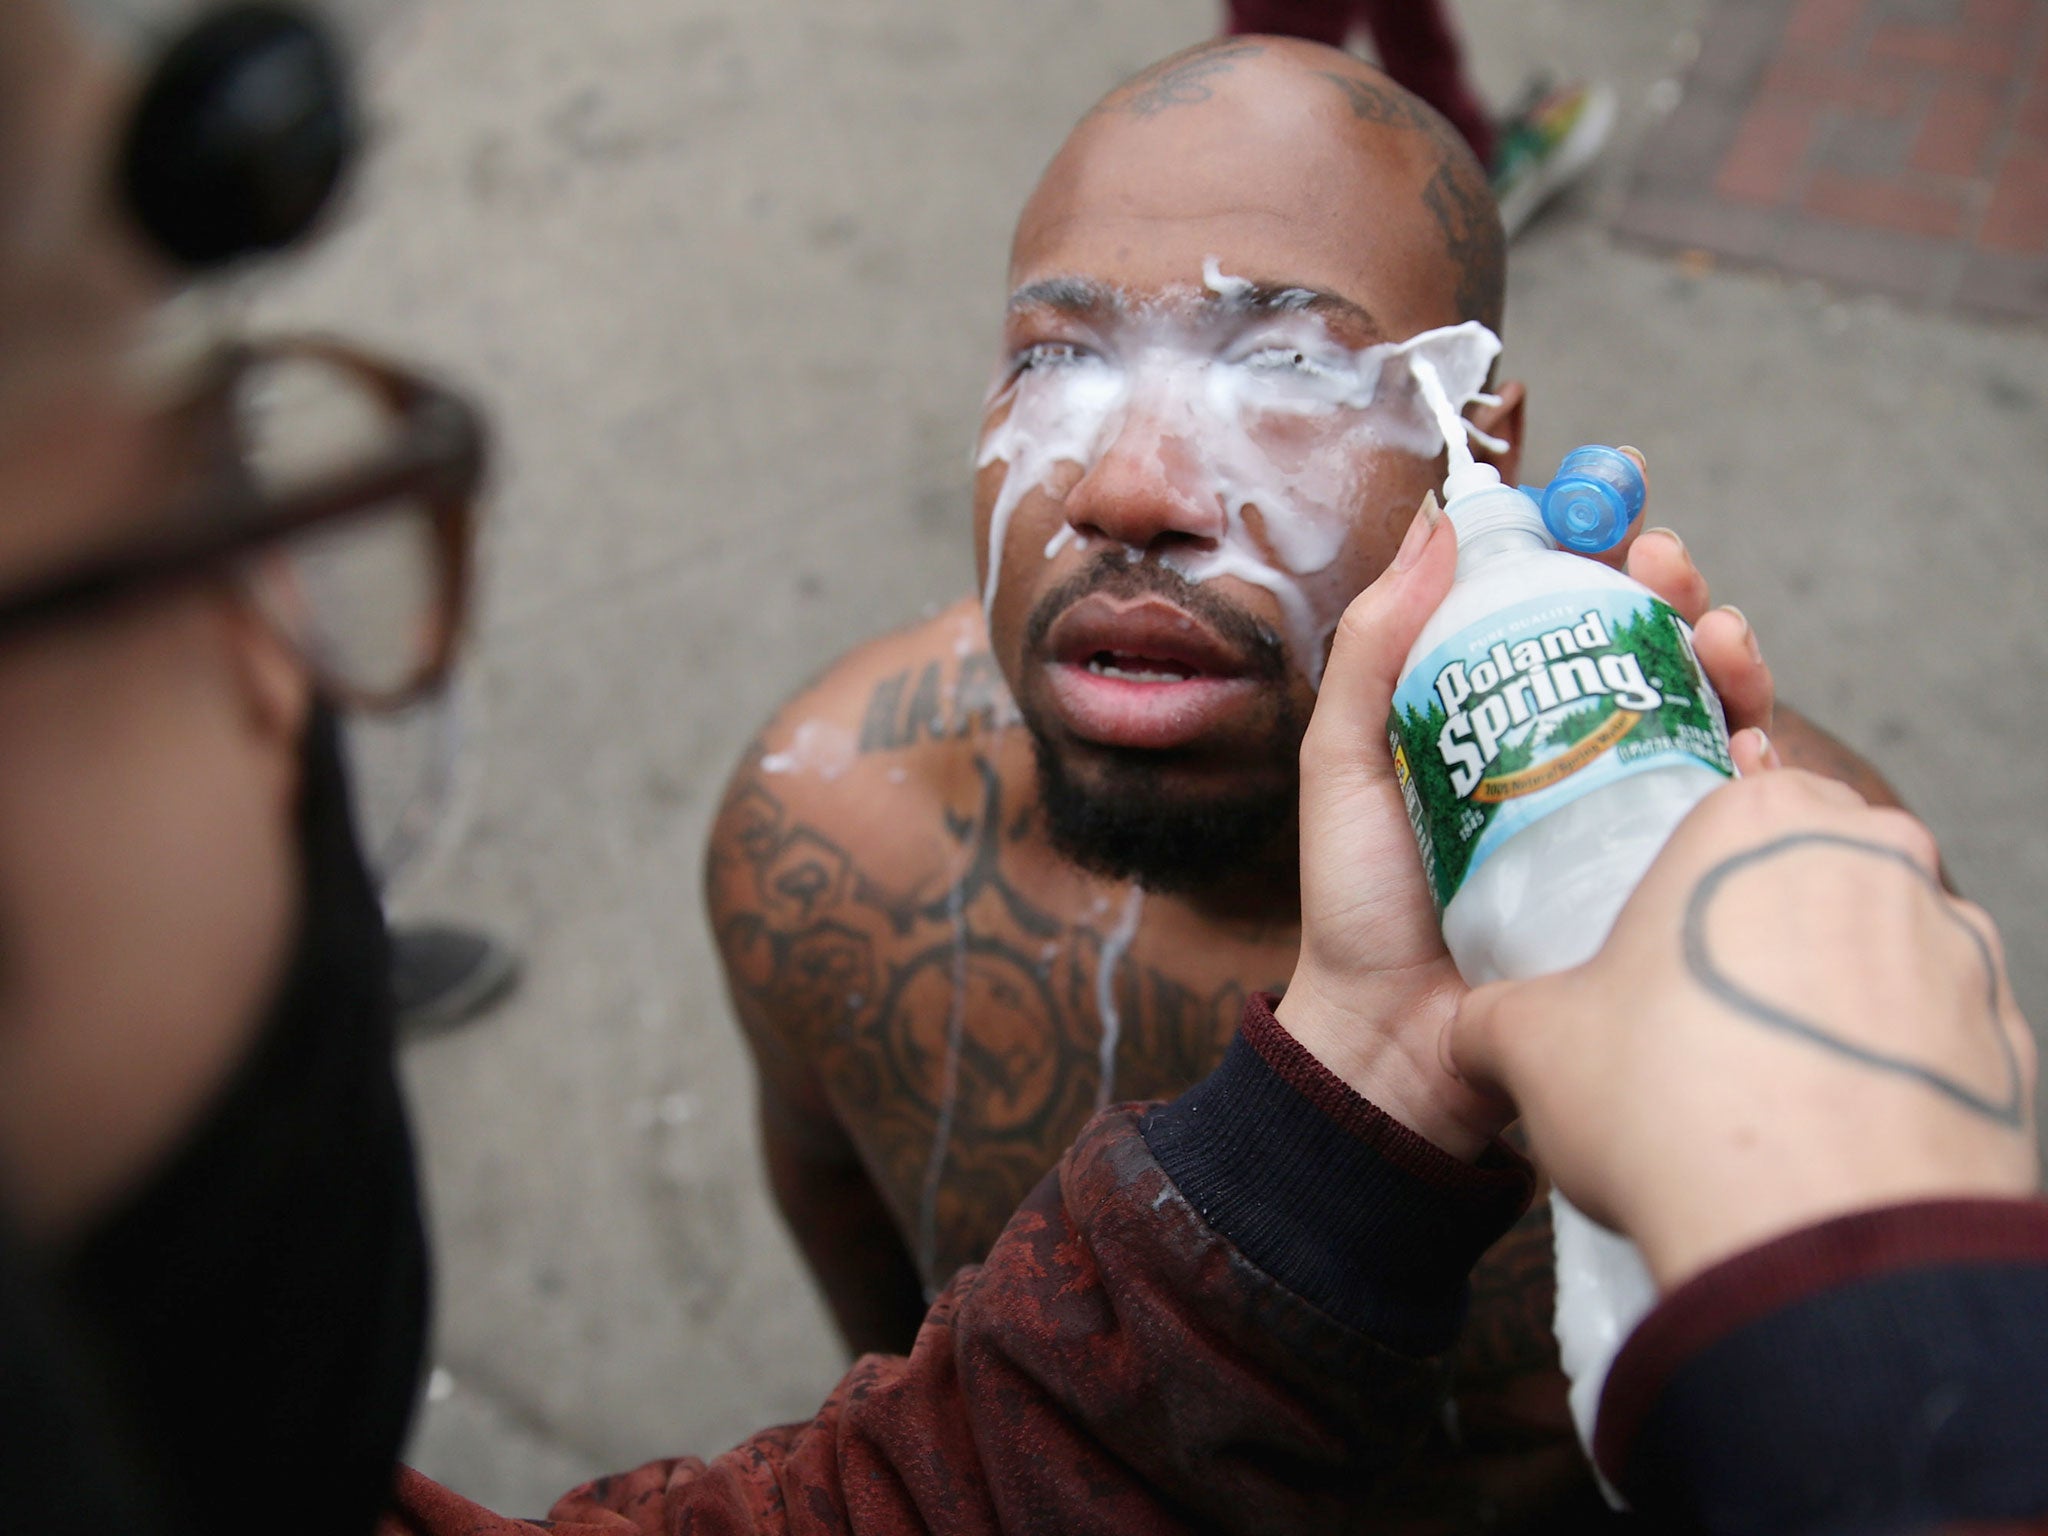 A man has his eyes cleaned after he was pepper sprayed by the Baltimore Police at the corner of Pennsylvania and North avenues during violent protests following the funeral of Freddie Gray in Baltimore